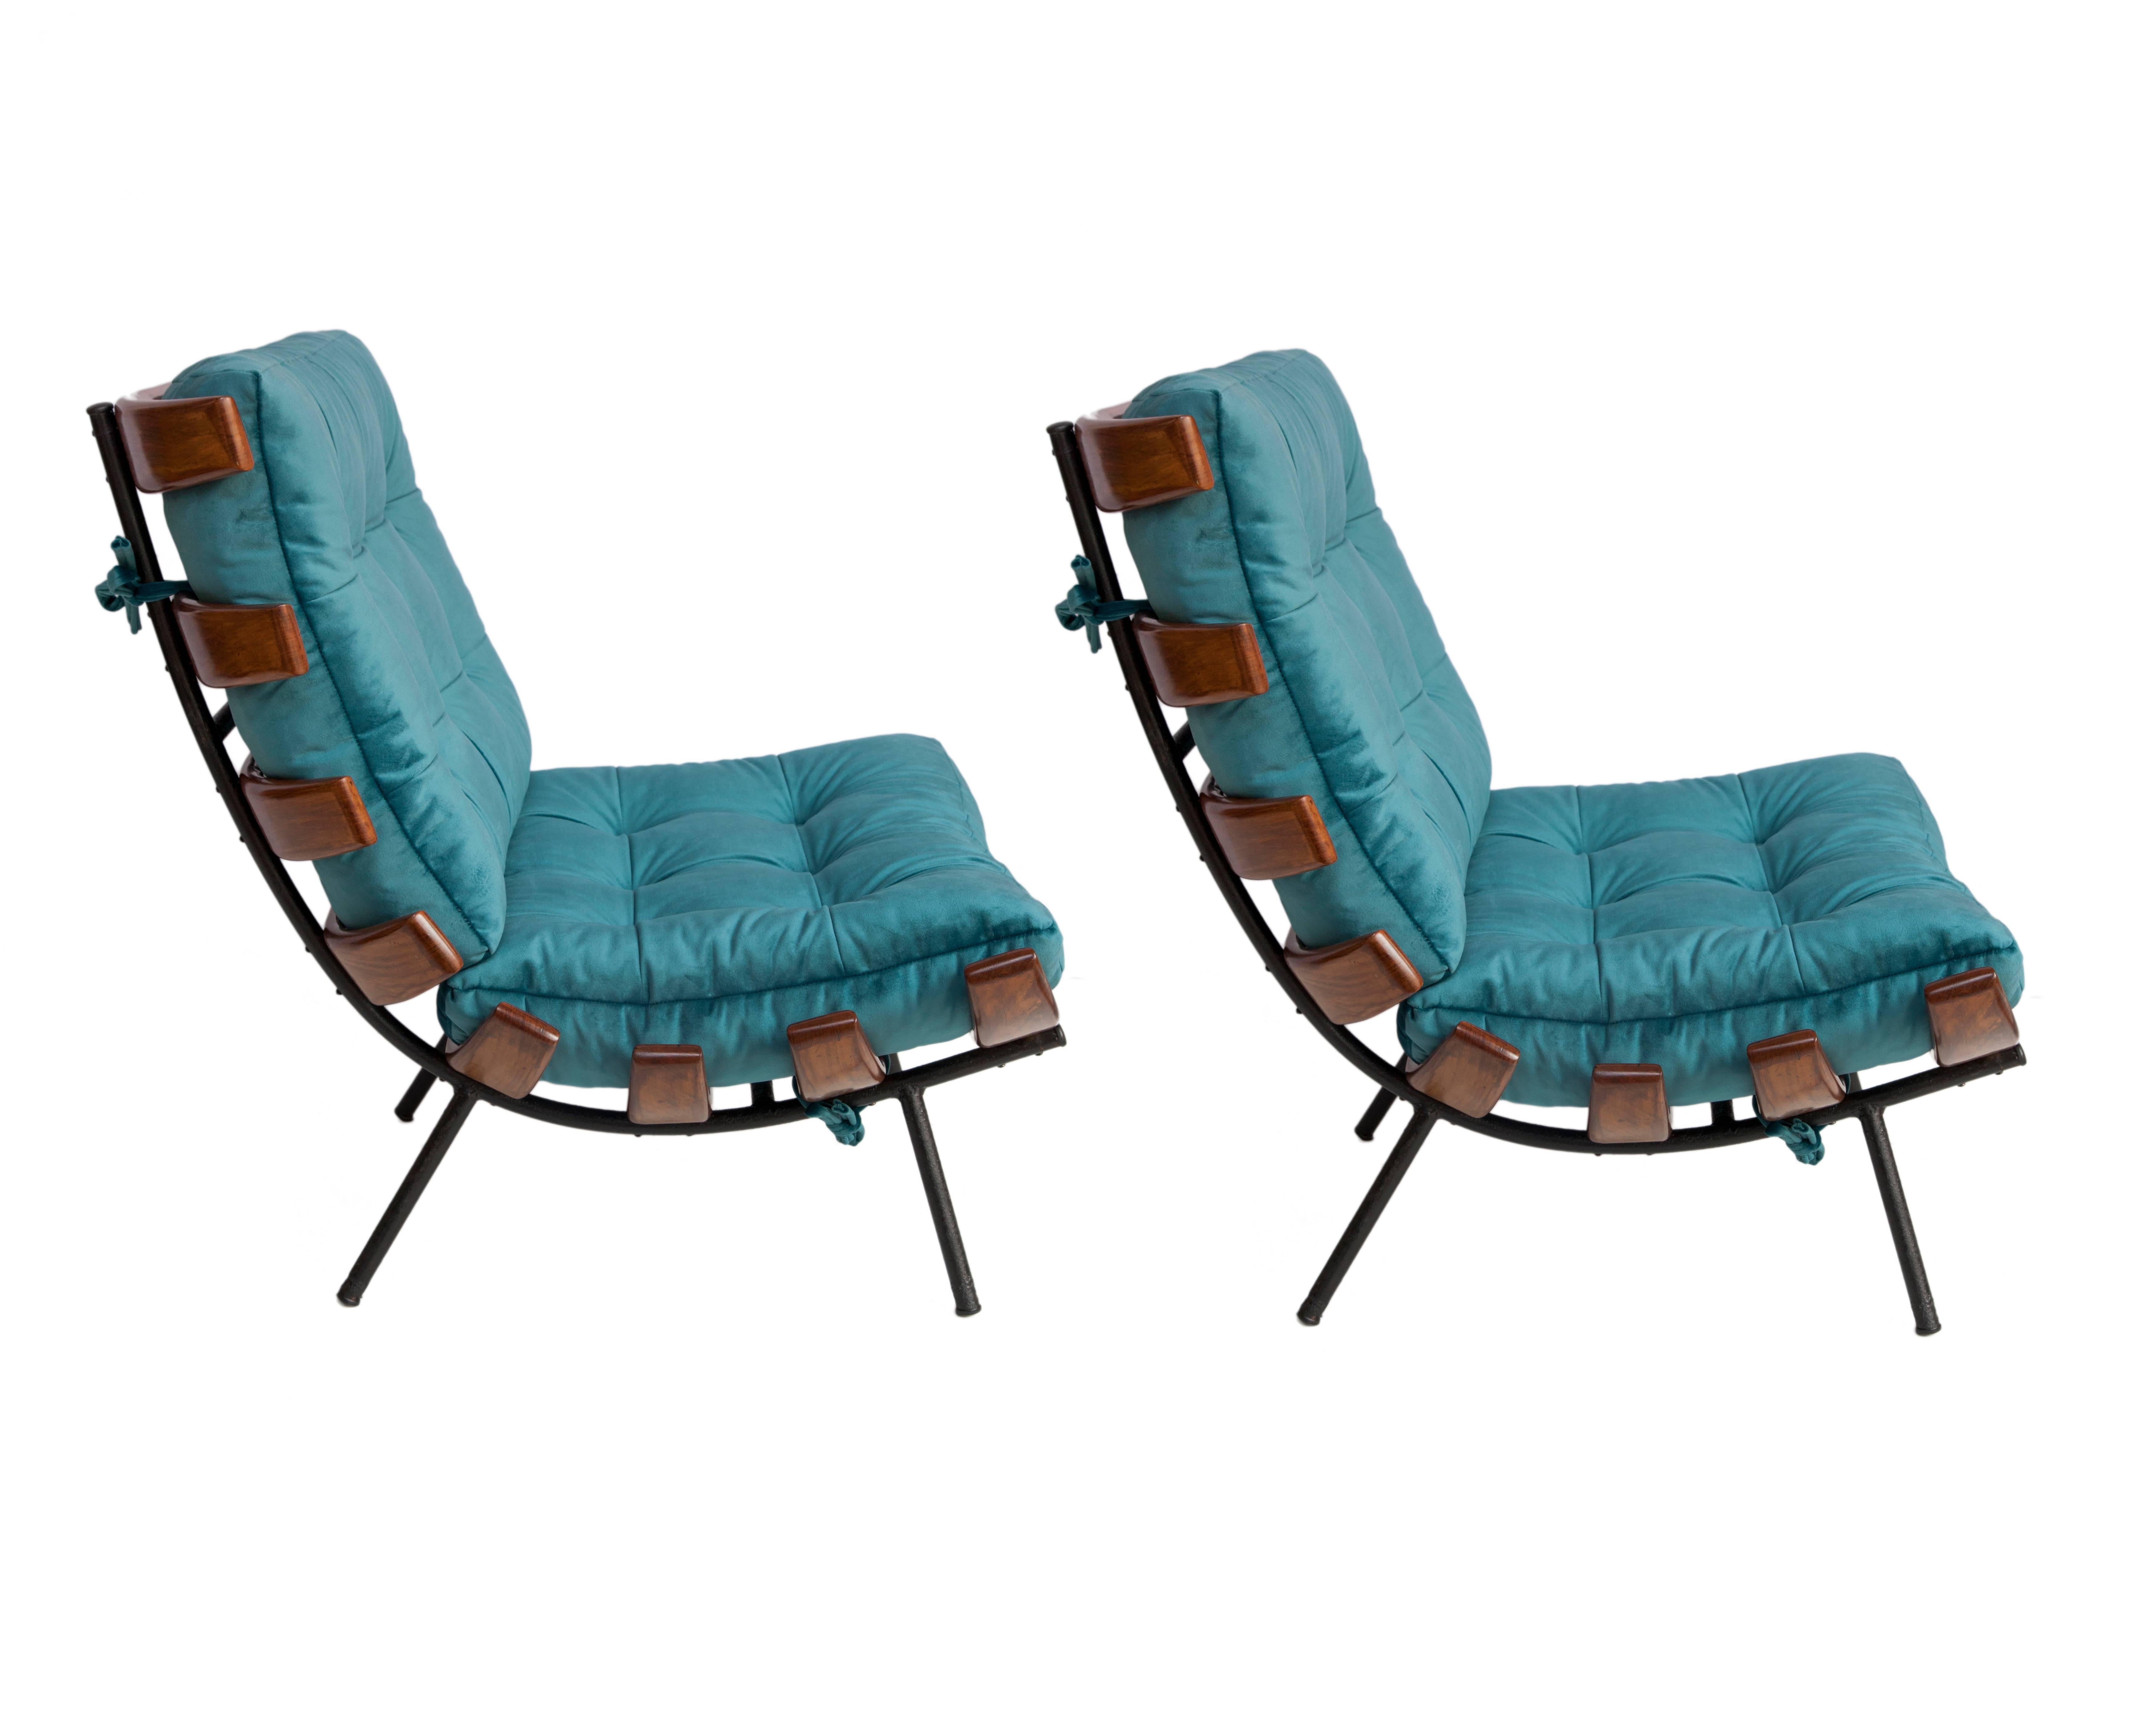 Rib chairs (also called Costela chairs) designed by Martin Eisler and Carlo Hauner in Brazilian caviuna wood and metal. These chairs are iconic Brazilian Mid-Century Modern pieces and date from circa 1950. Each chair has been recently reupholstered